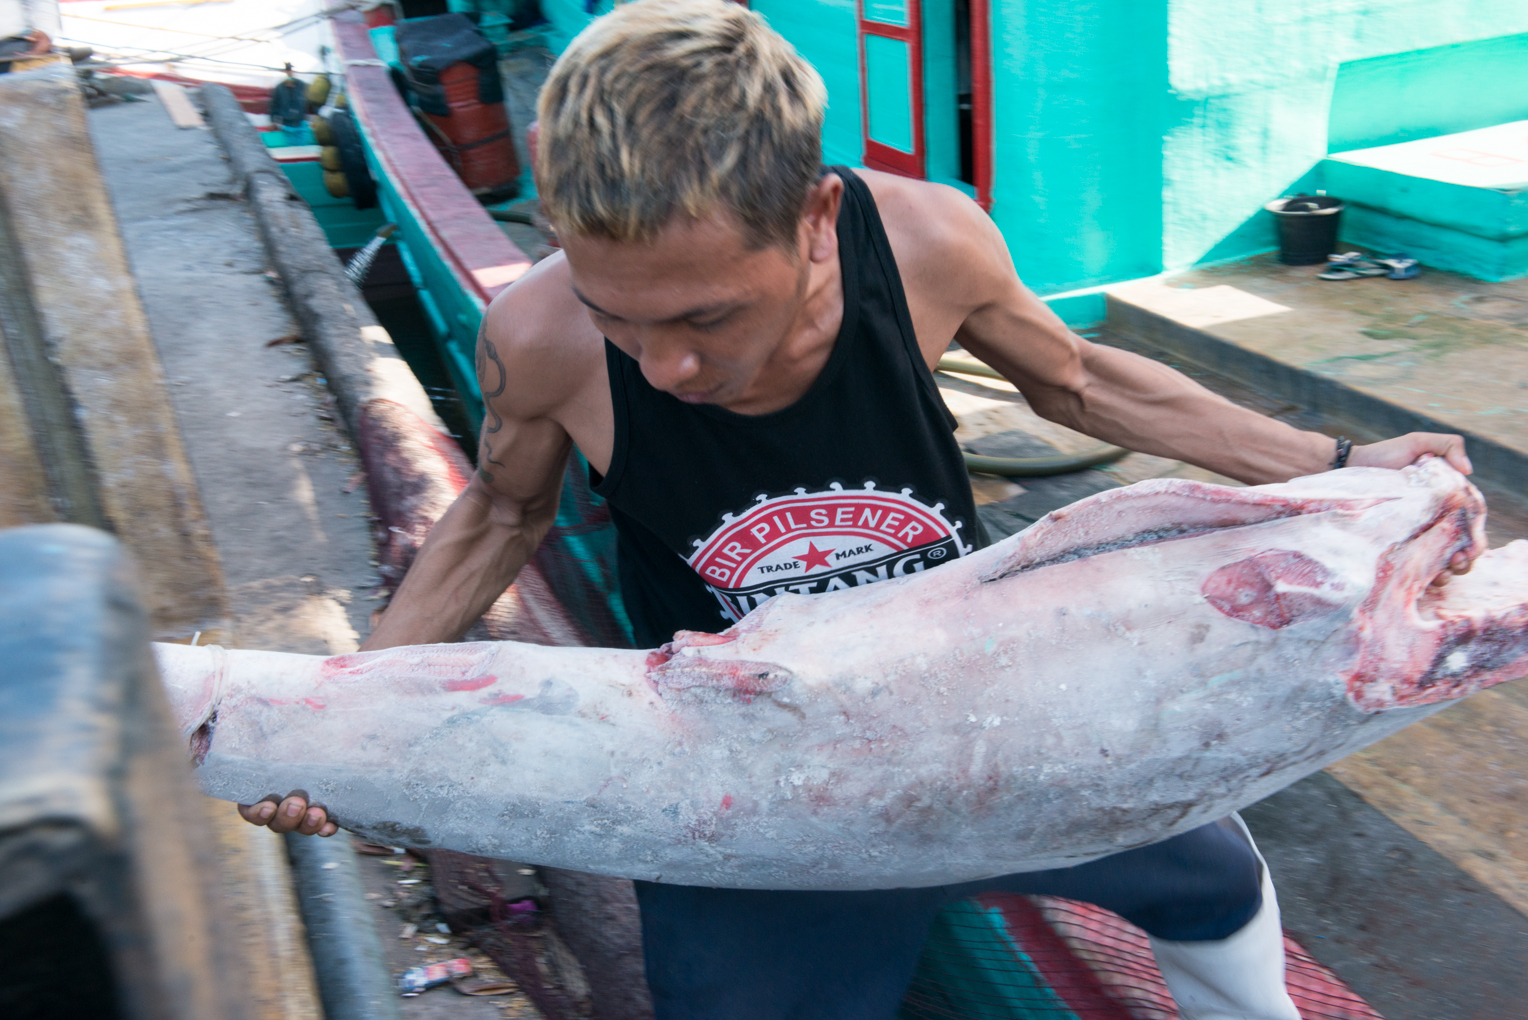 scores-of-sharks-were-transferred-from-the-boat-some-of-them-endangered-species-photo-by-johnny-langenheim.jpg